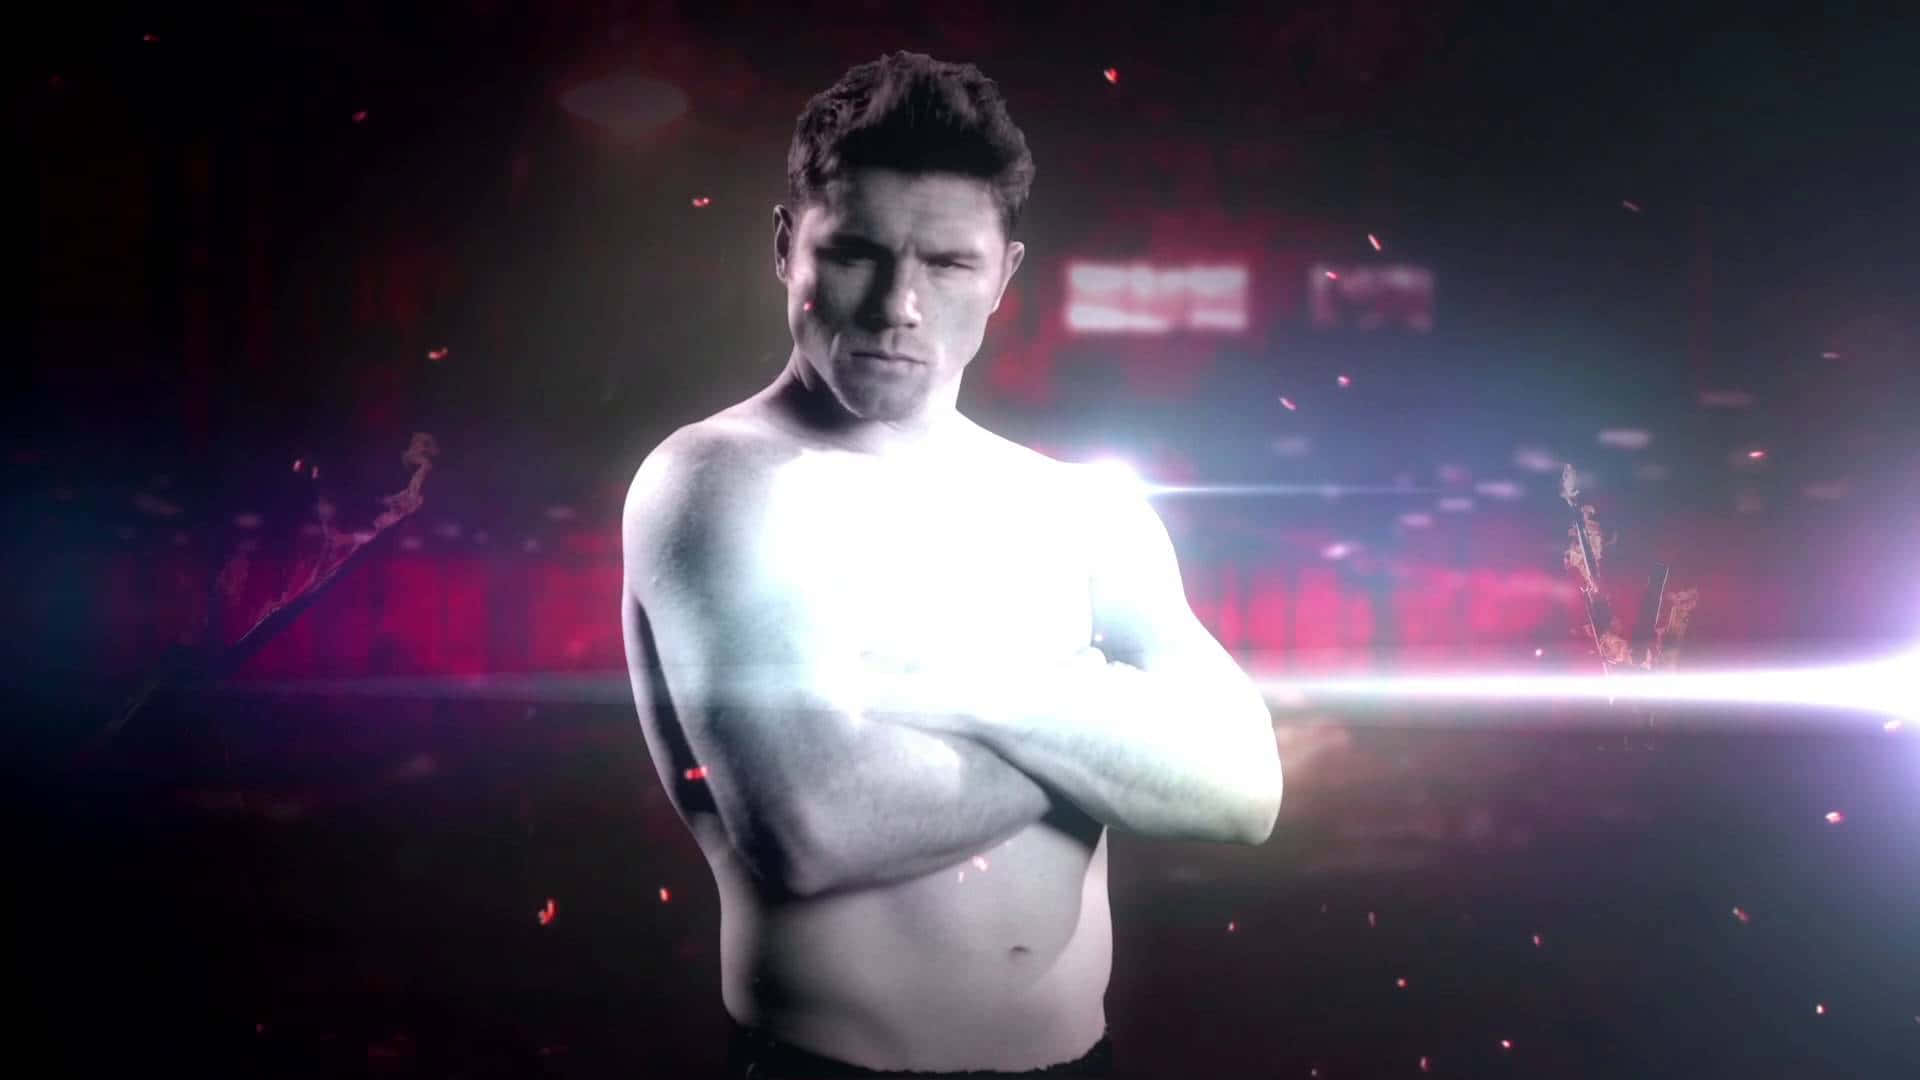 Image Of Saul Canelo Alvarez With Effects Wallpaper